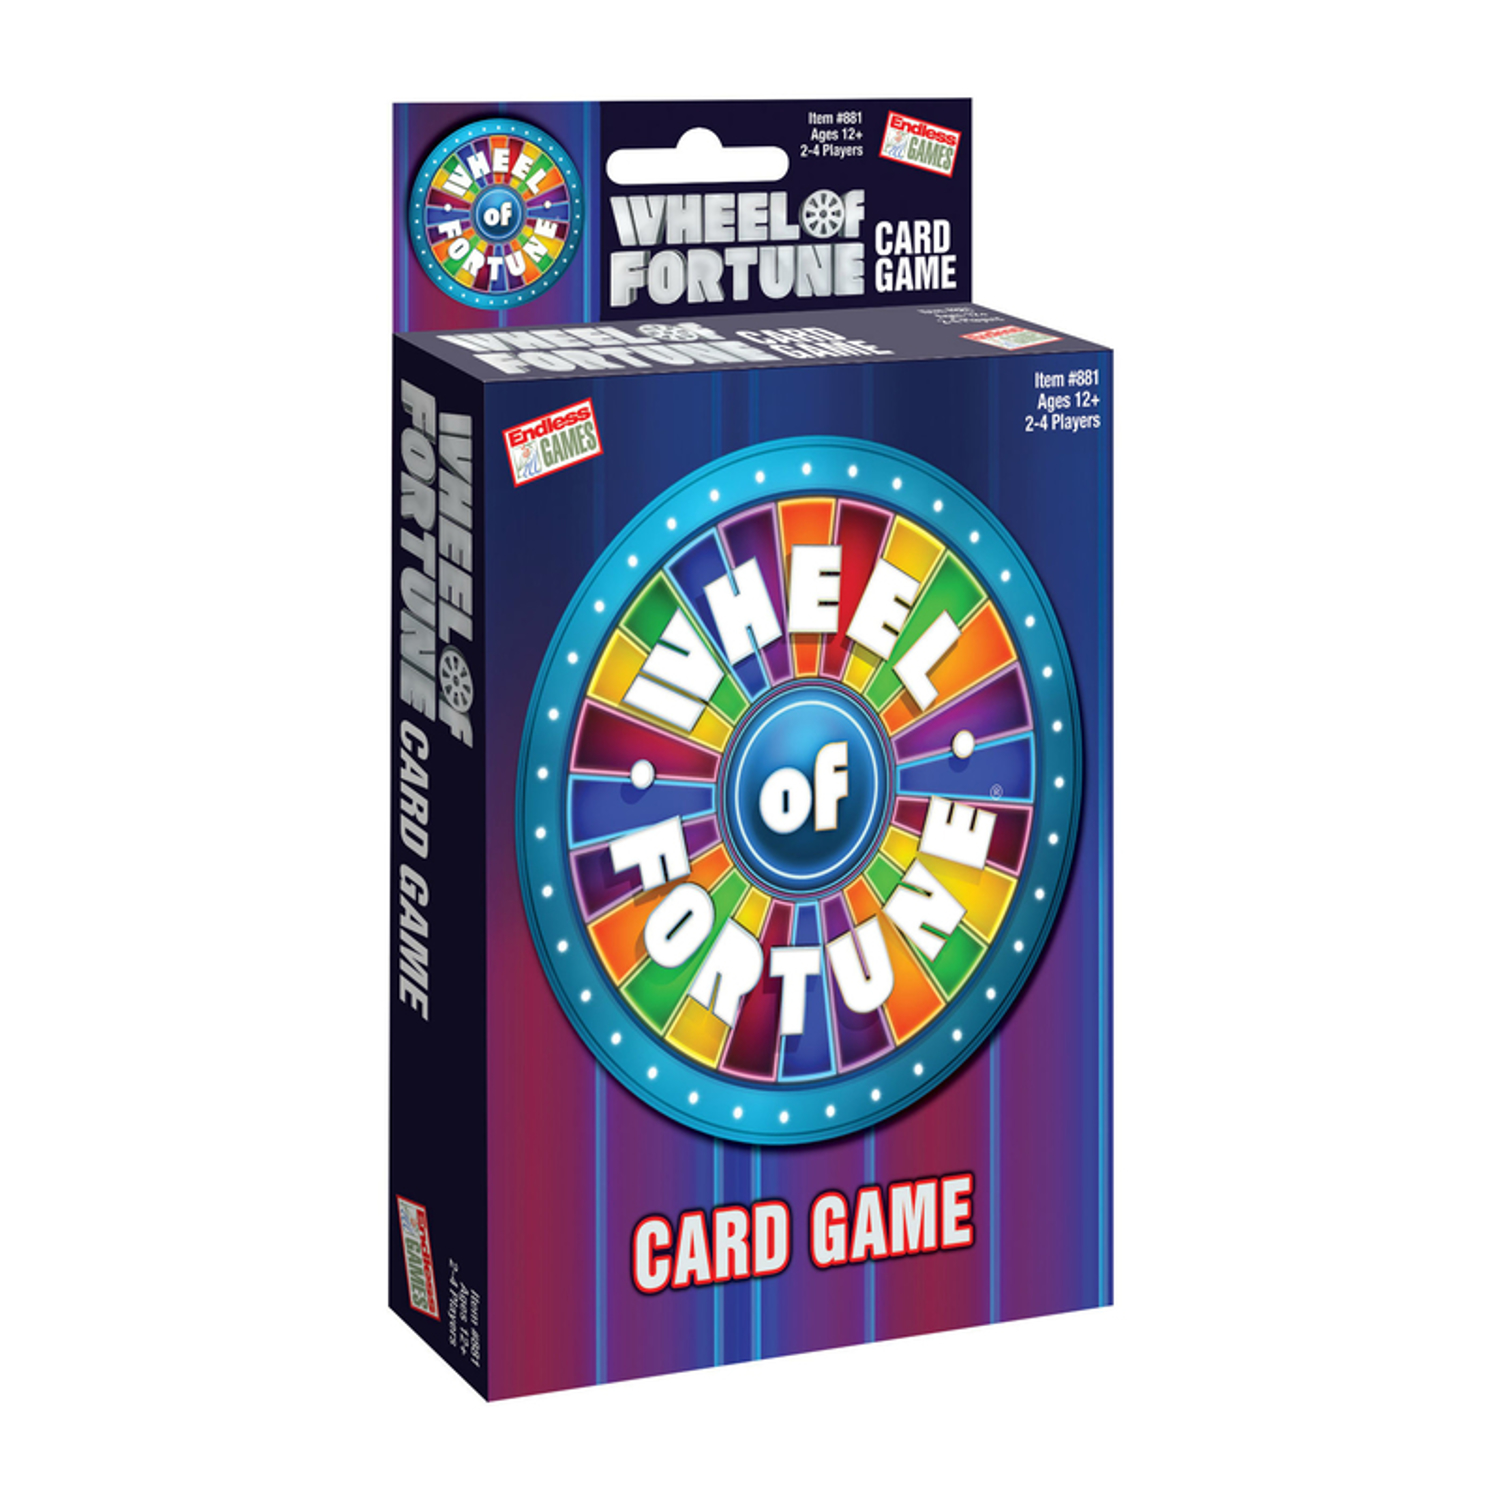 Photos - Other interior and decor FORTUNE Endless Games Wheel of  Card Game Cardboard 109 pc 881 